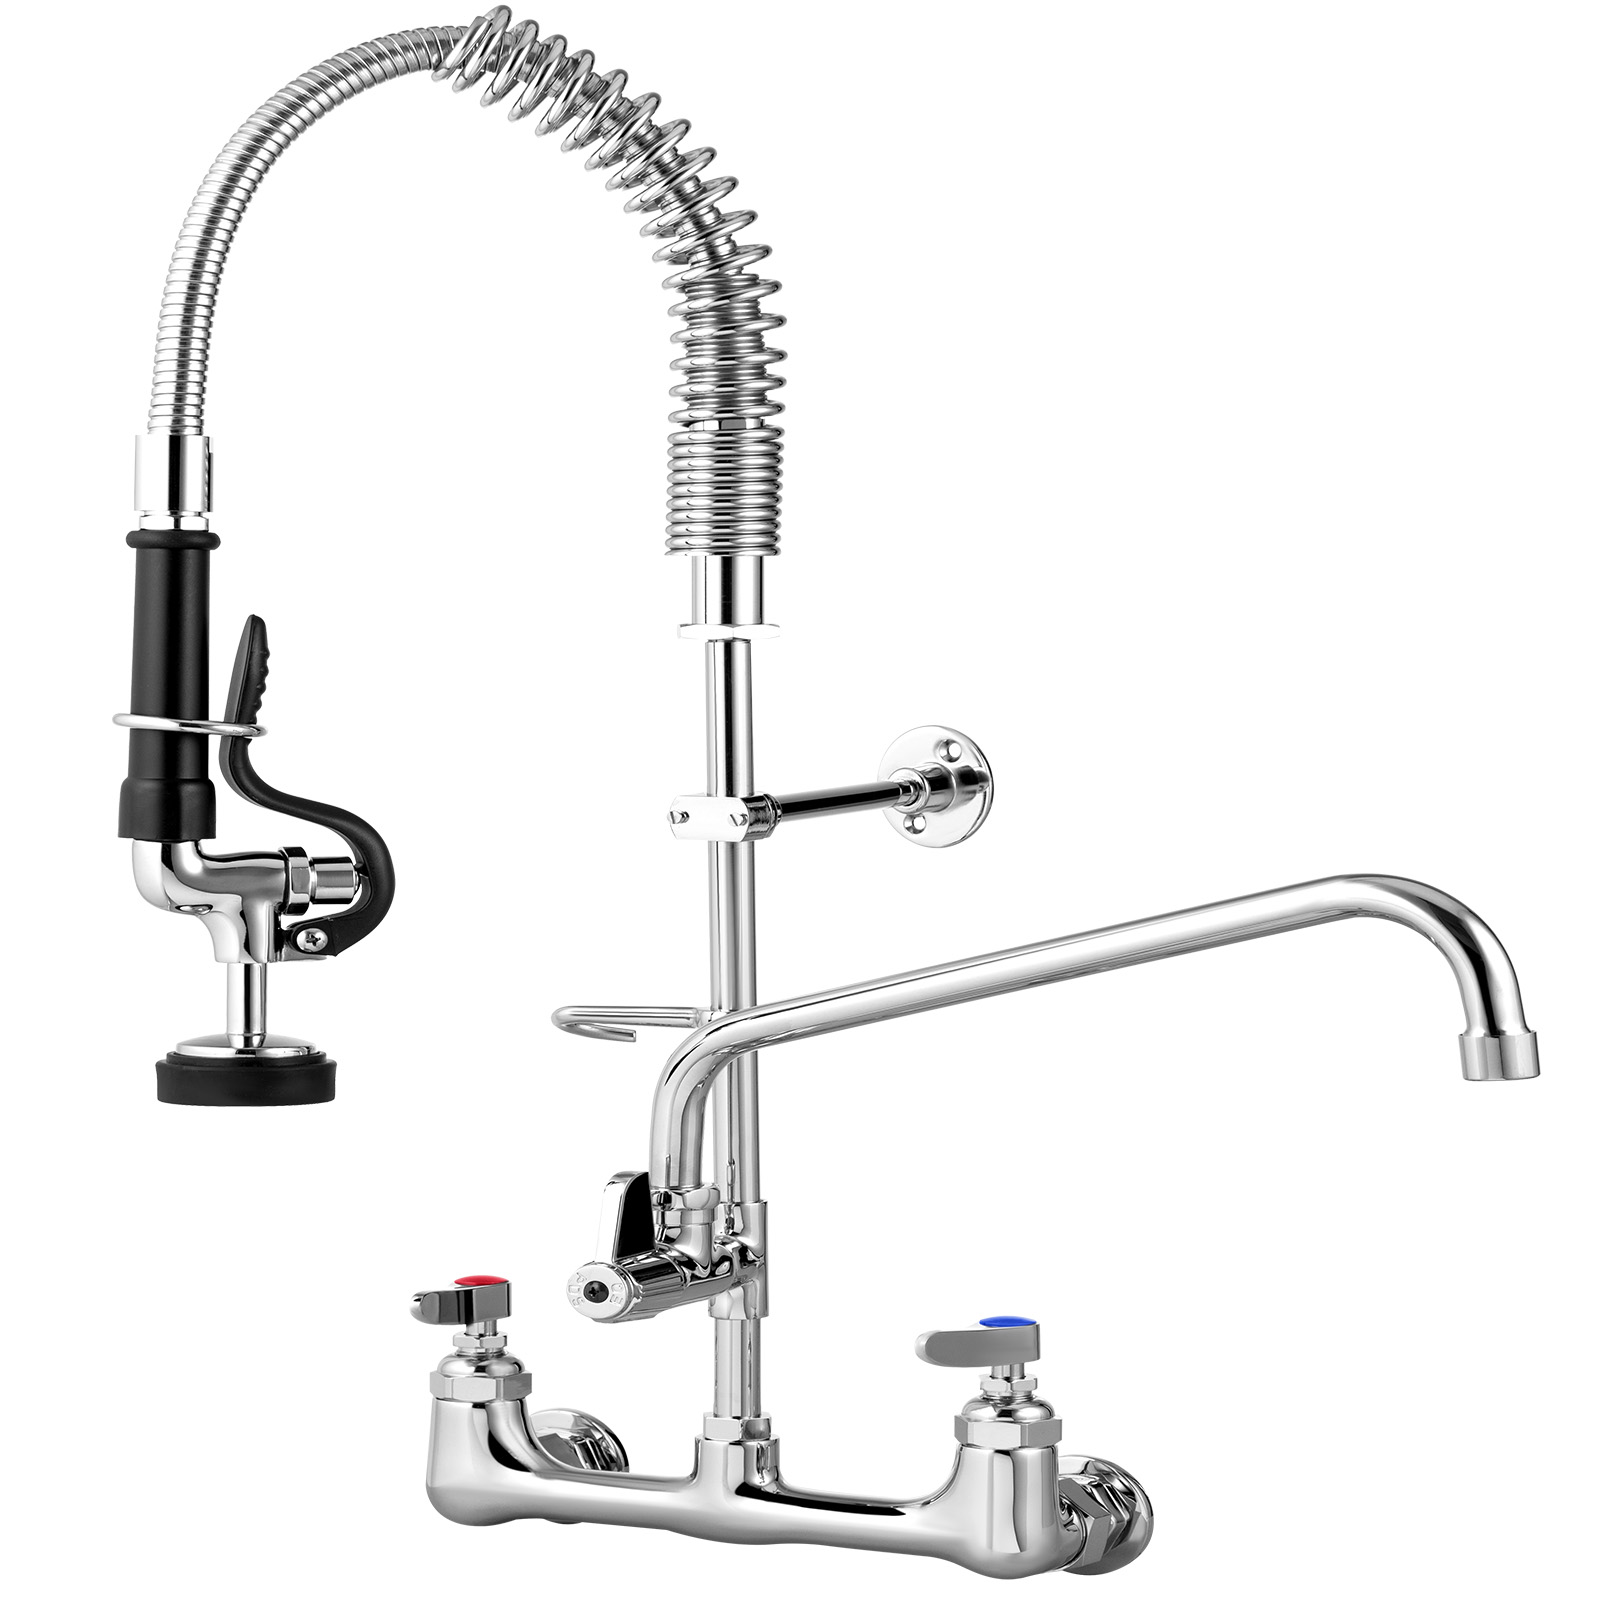 Commercial Wall Mount Faucet M100 12 ?37122